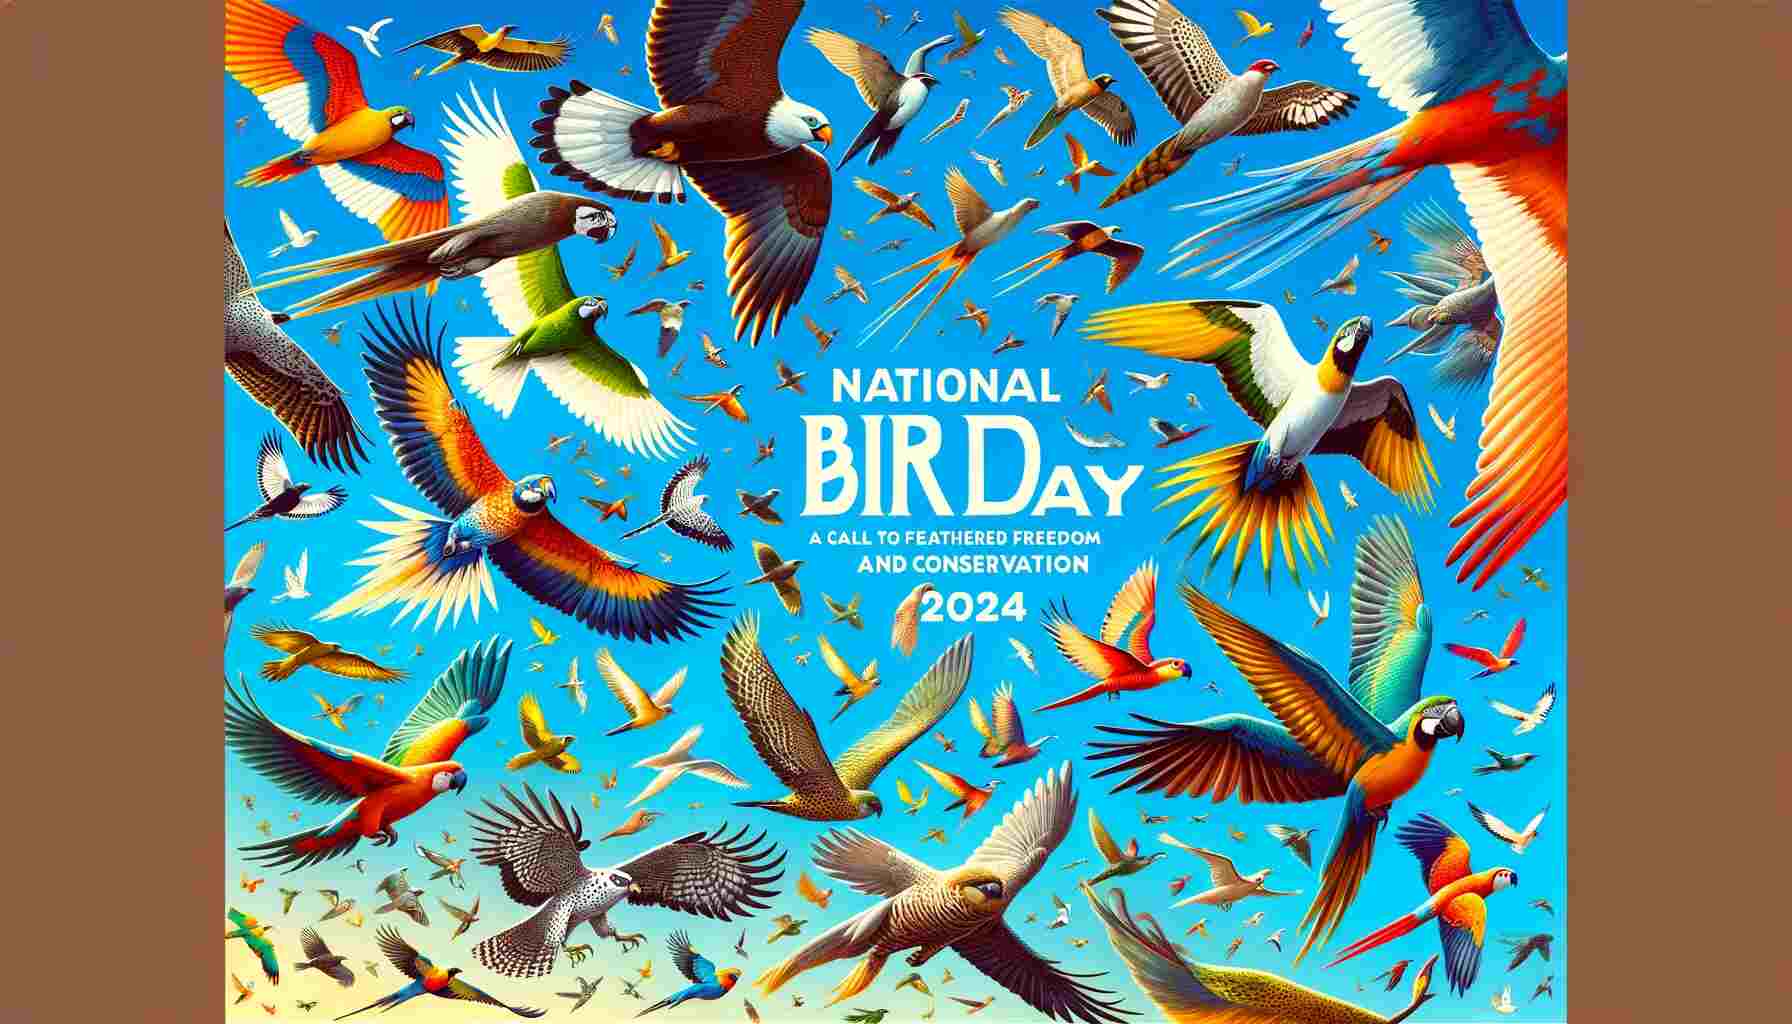 Here's the featured image for "National Bird Day 2024: A Call to Feathered Freedom and Conservation." It depicts a vibrant array of birds in flight against a clear blue sky, symbolizing freedom and diversity, with the event title prominently displayed.